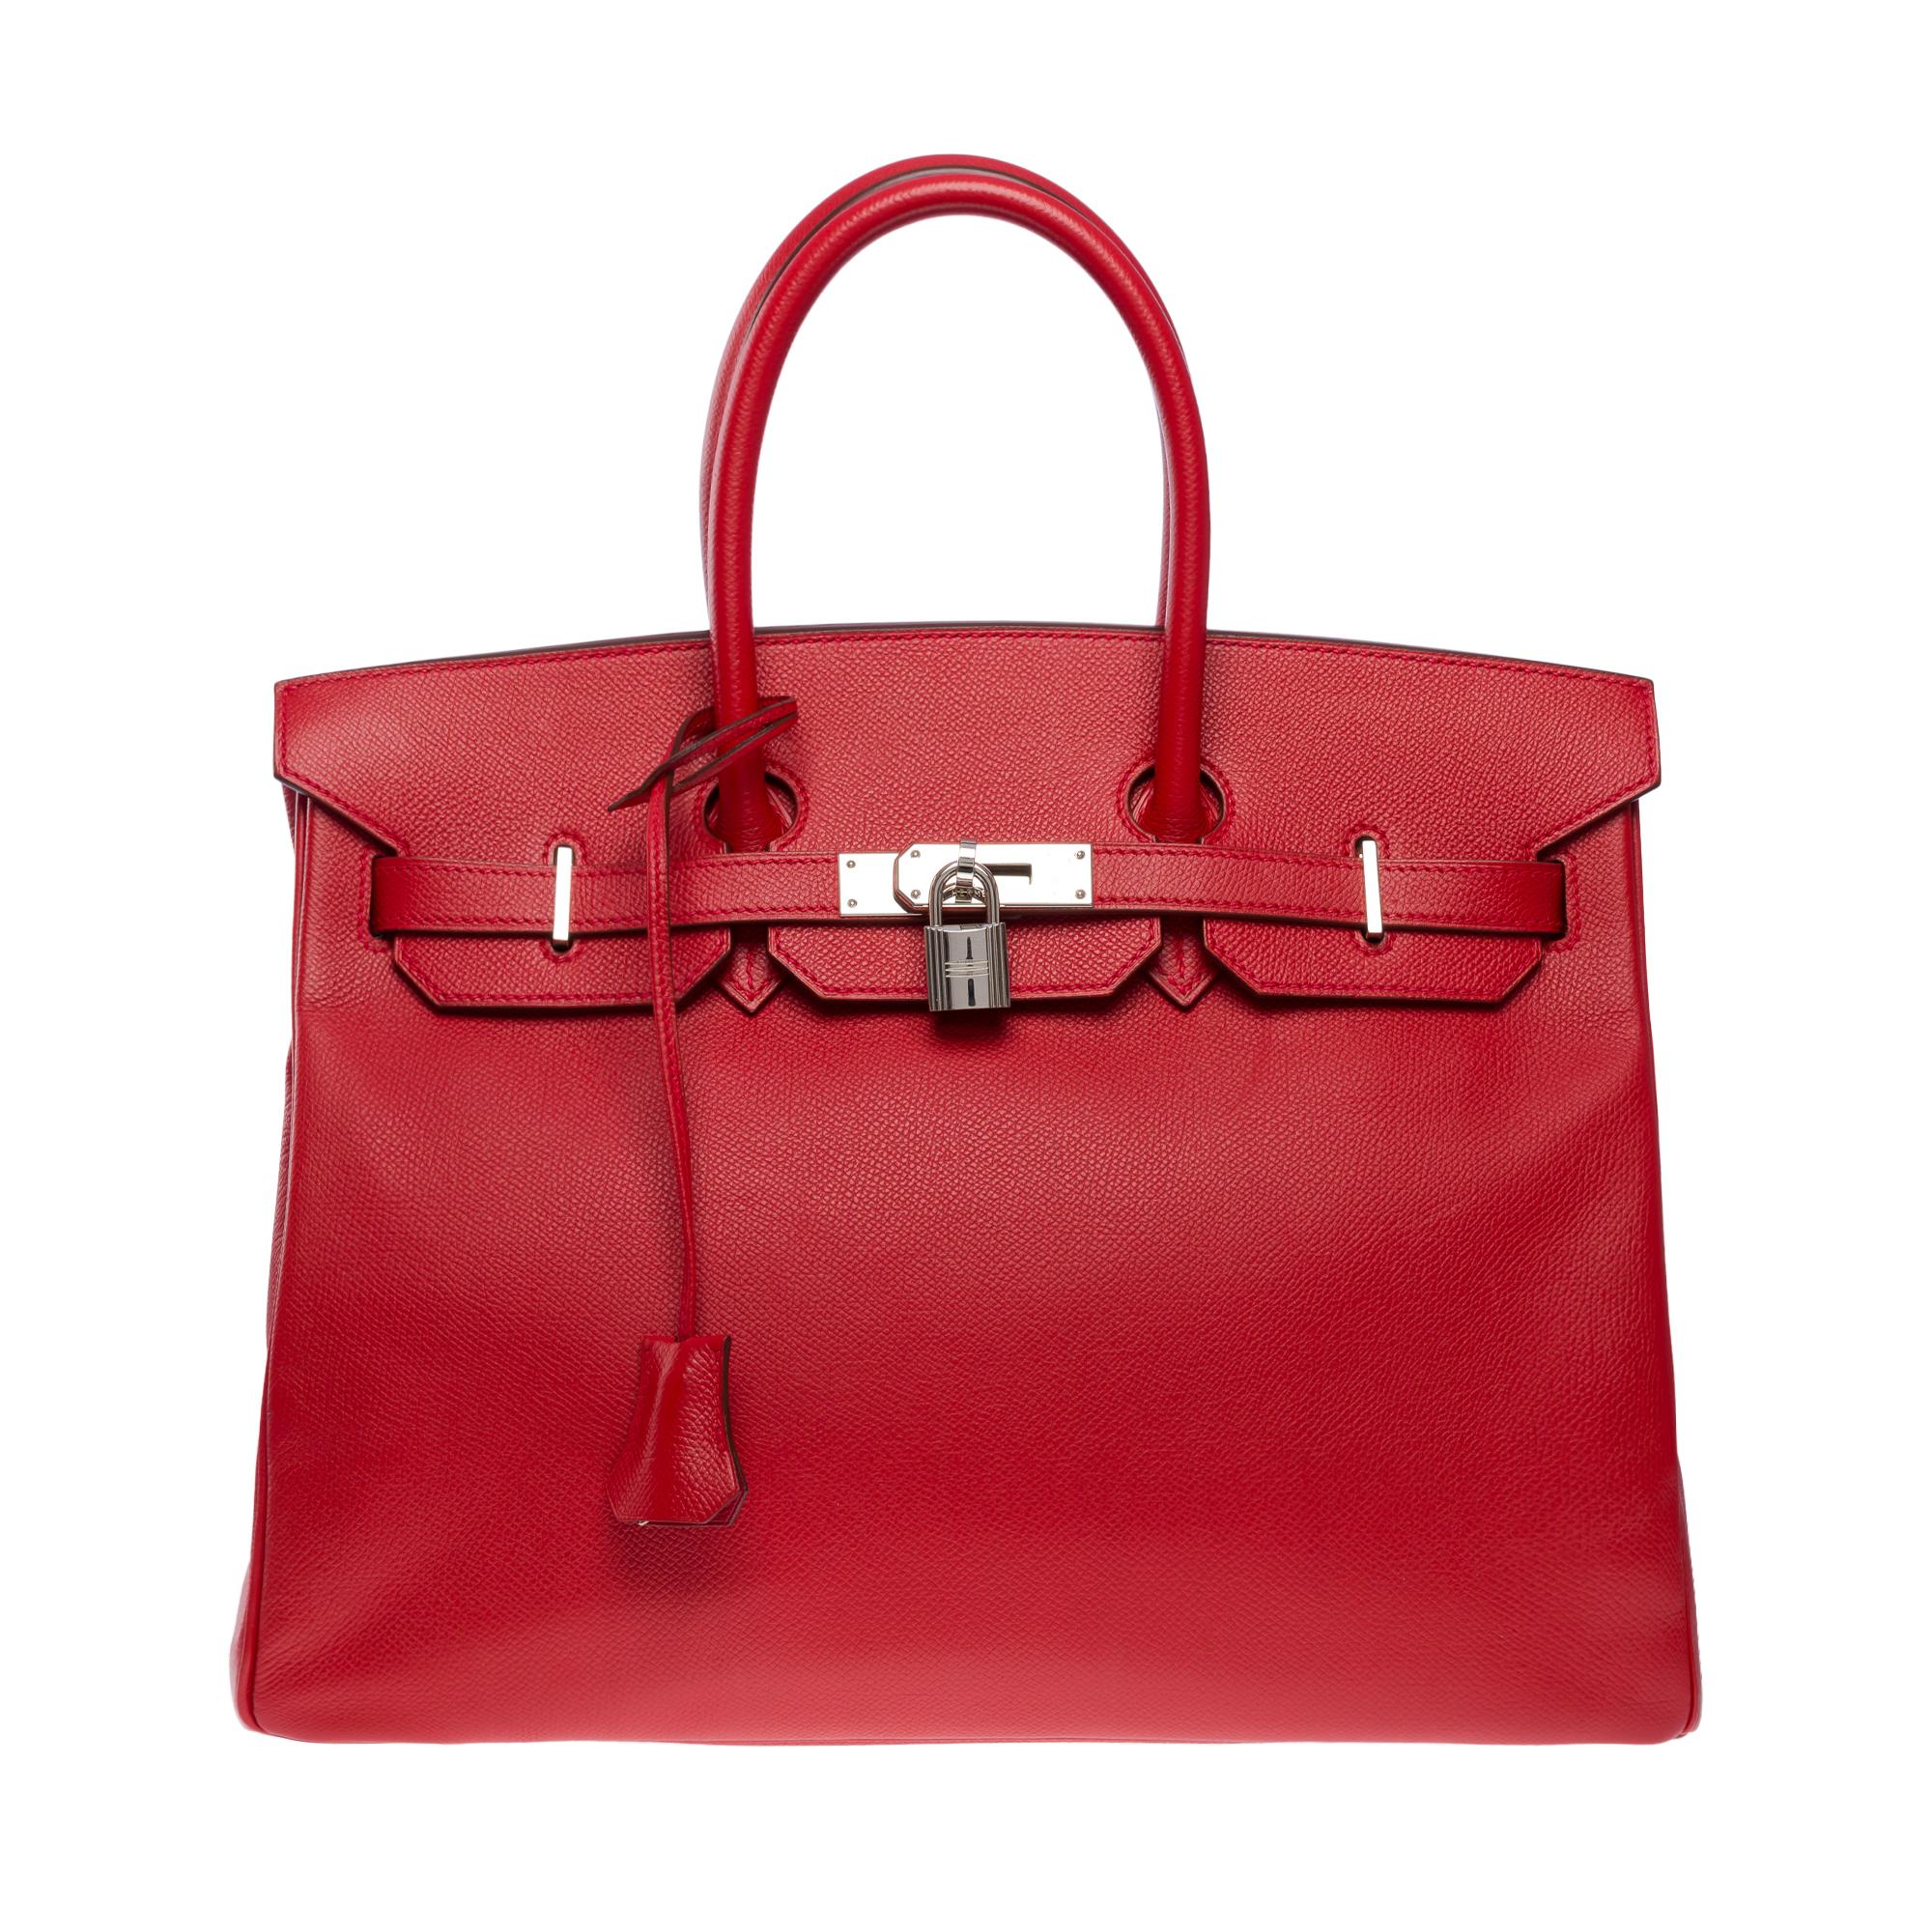 Amazing Hermes Birkin 35 handbag in Rouge Garance Epsom leather, palladium silver metal hardware, double handle in red leather allowing a hand carry

Flap closure
Red leather inner lining, a zippered pocket, a patch pocket
Signature: 